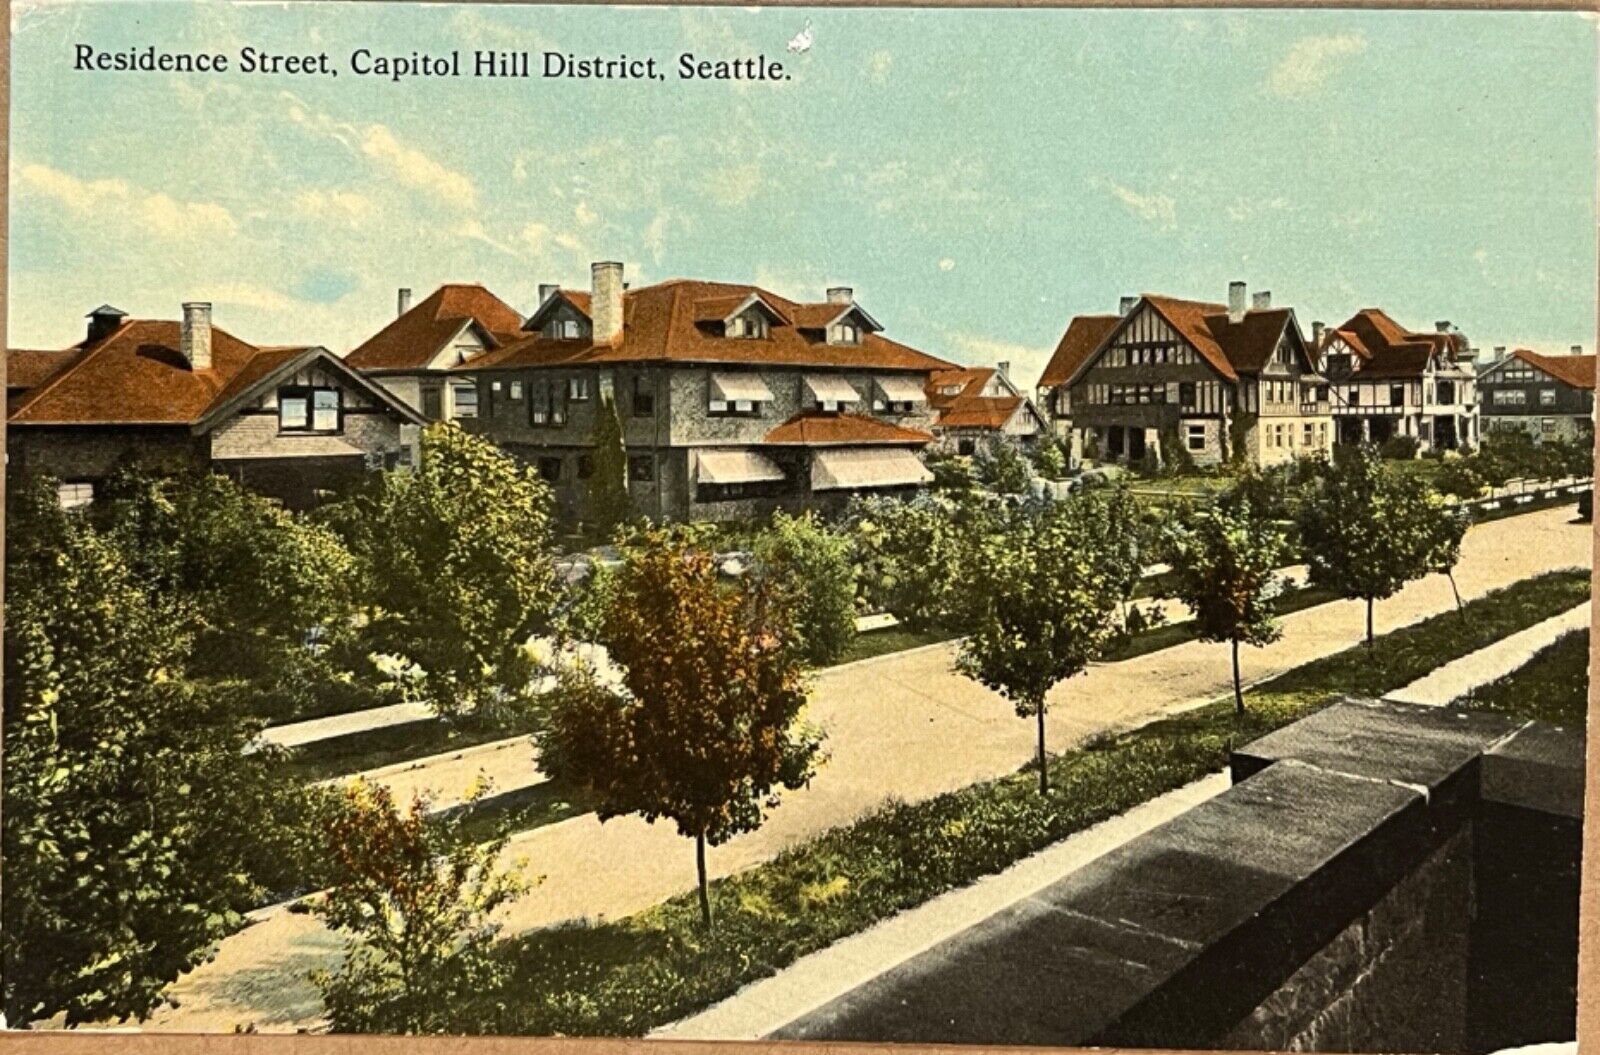 Seattle Residential Street View Capitol Hill Washington Antique Postcard c1910